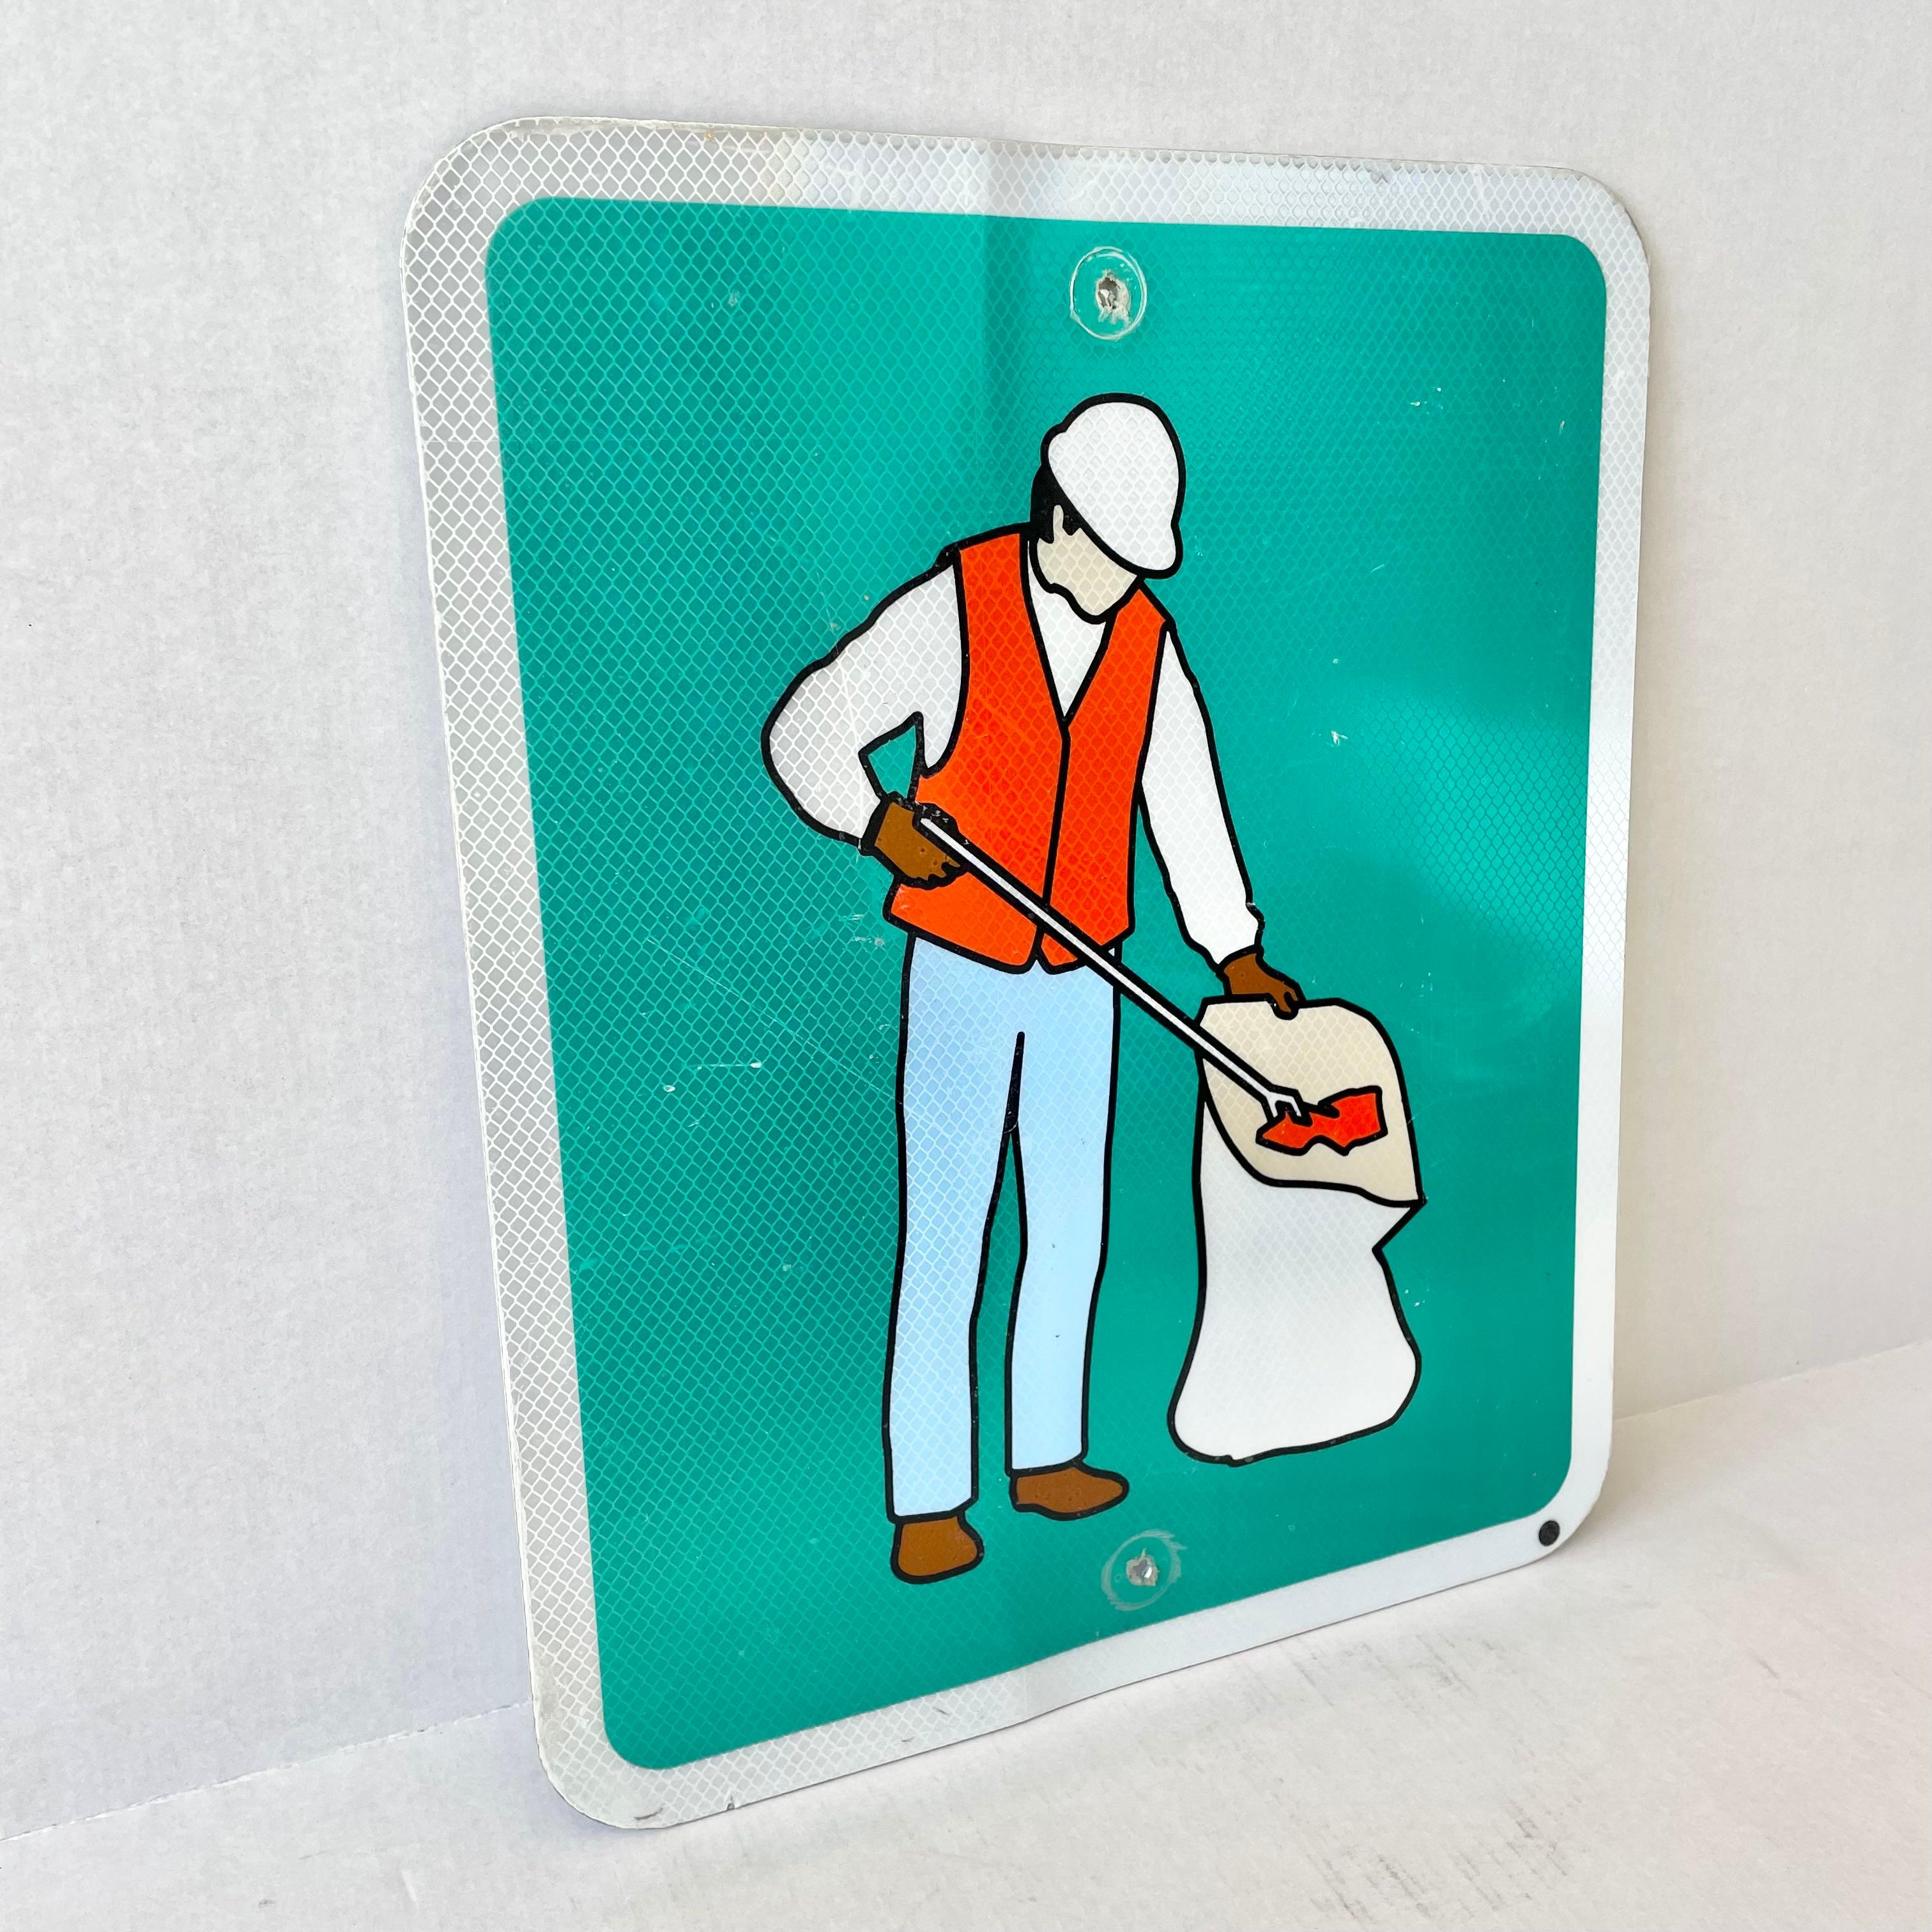 Los Angeles trash cleanup sign. Emerald green background with a man in work clothes picking up trash. Great coloring and patina. Cool vintage graphics. Slight bend in metal. Fun piece of transportation ephemera. Stamped 